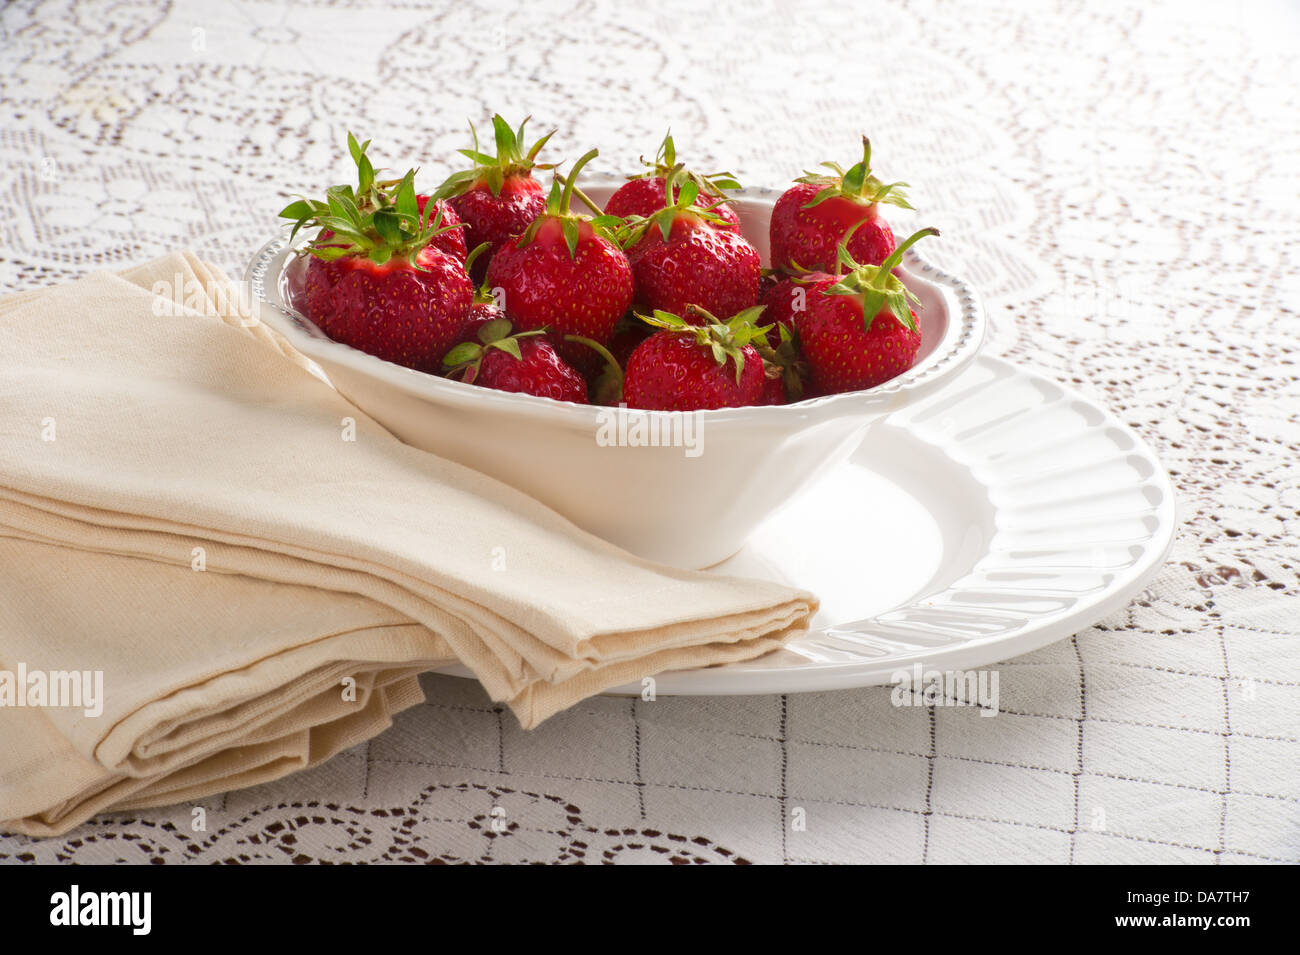 Bowl of fresh strawberries in white bowl with napkins on white lace tablecloth Stock Photo